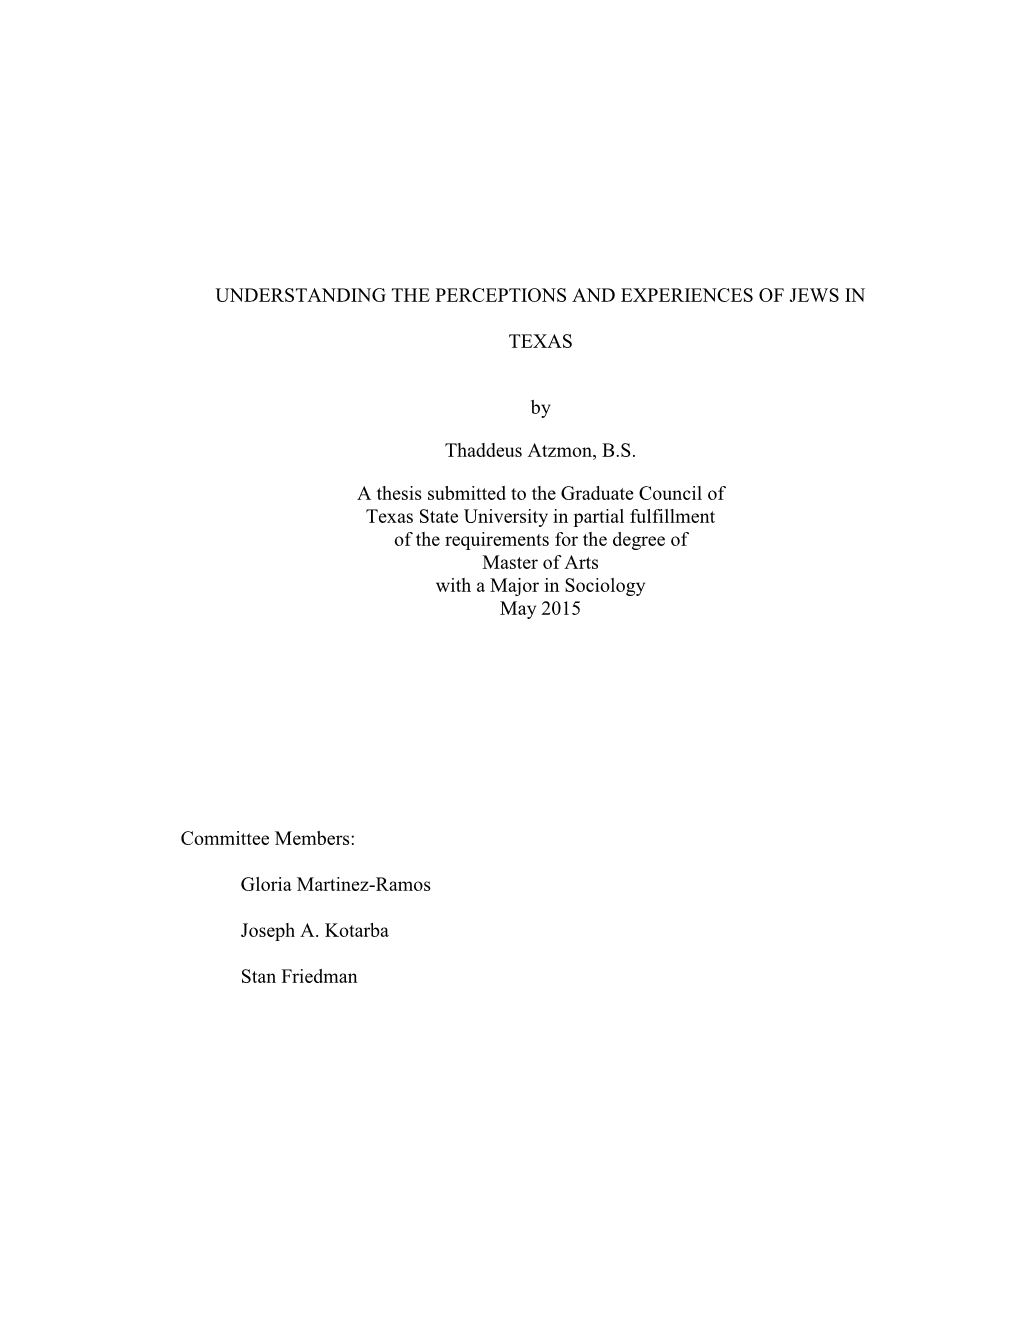 UNDERSTANDING the PERCEPTIONS and EXPERIENCES of JEWS in TEXAS by Thaddeus Atzmon, B.S. a Thesis Submitted to the Graduate Counc